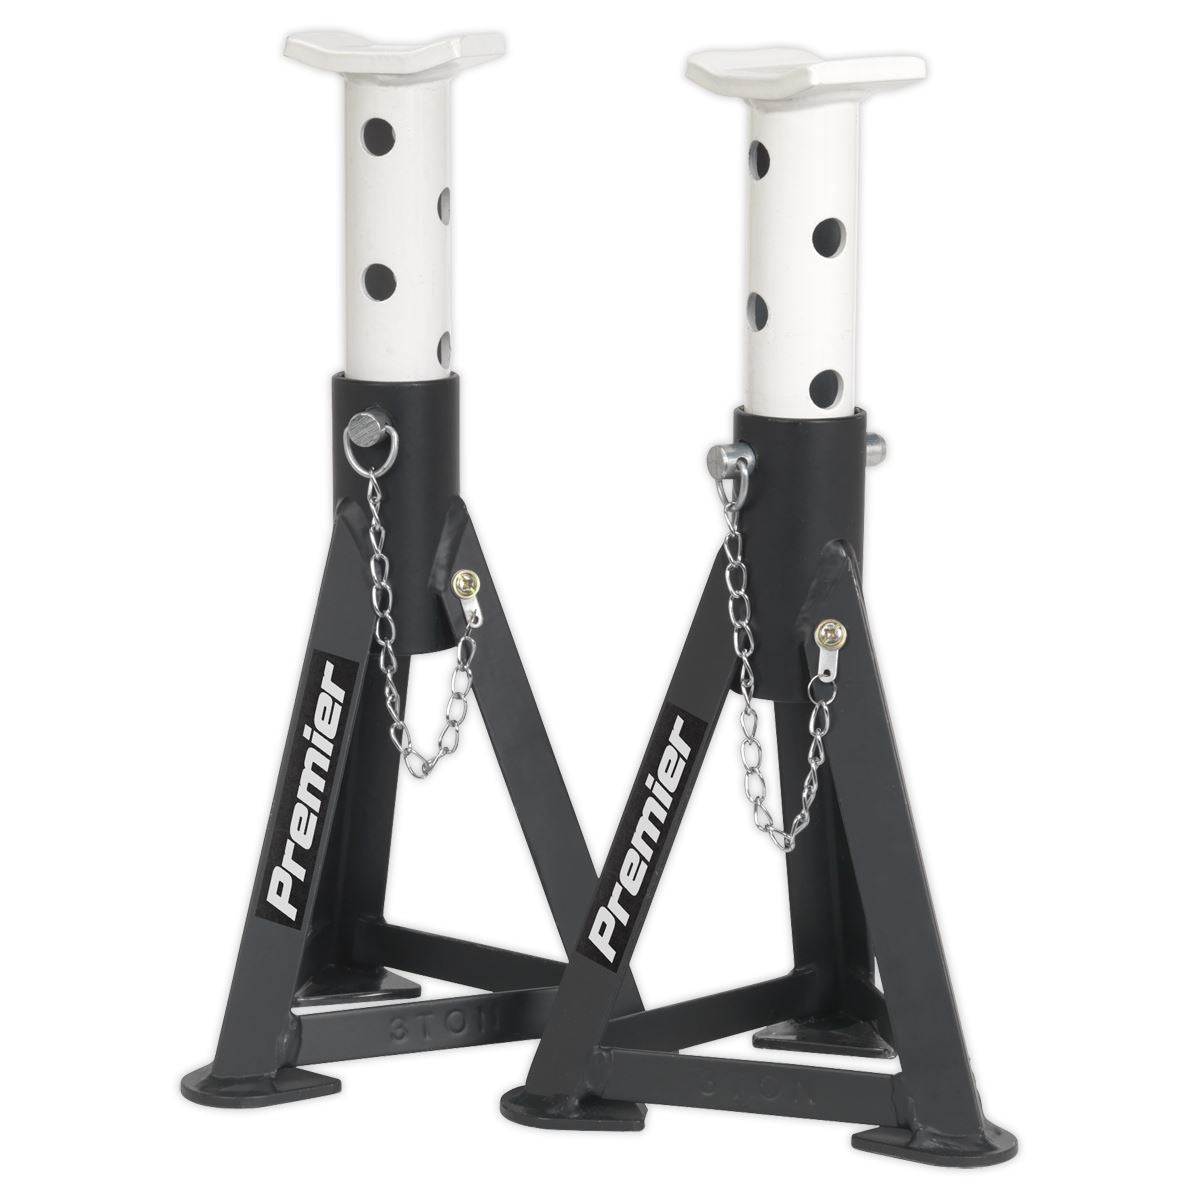 Sealey Premier Premier Axle Stands (Pair) 3 Tonne Capacity per Stand - White